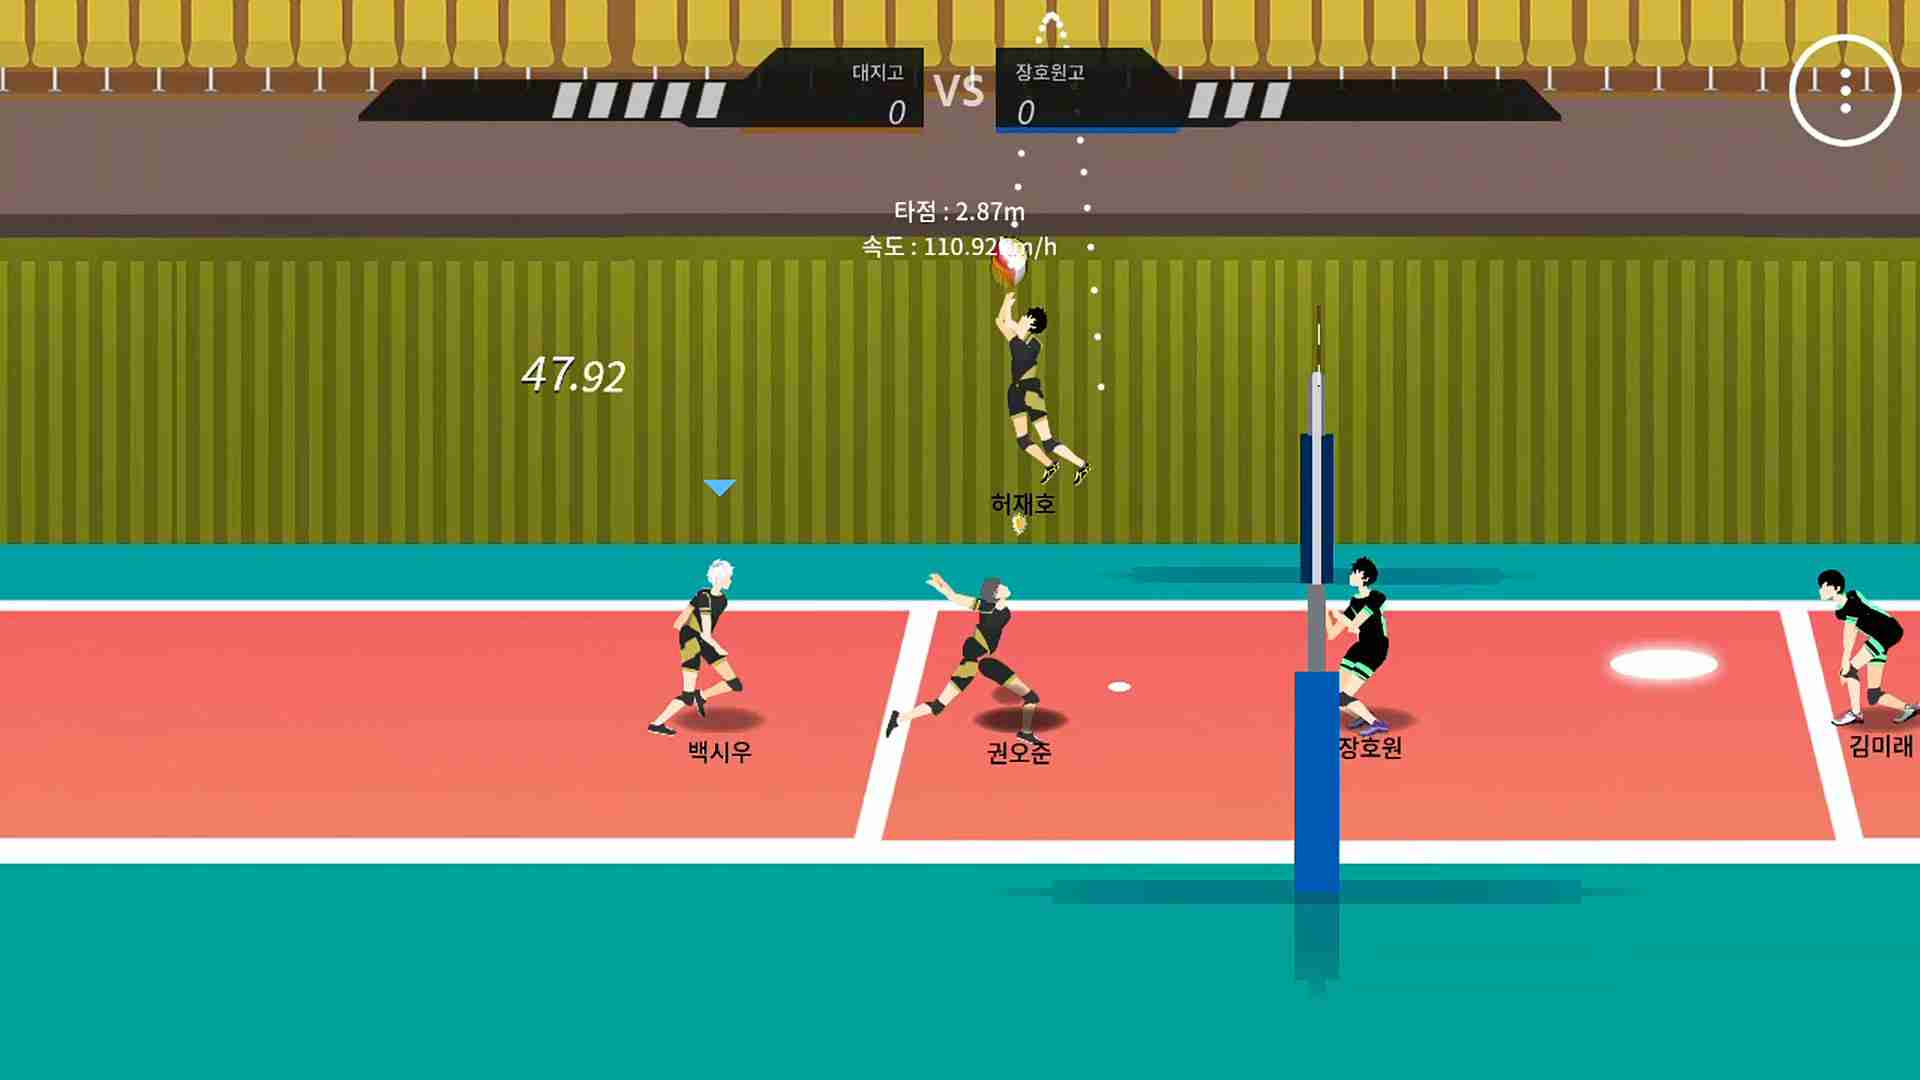 The spike volleyball story Hack Full cầu thủ